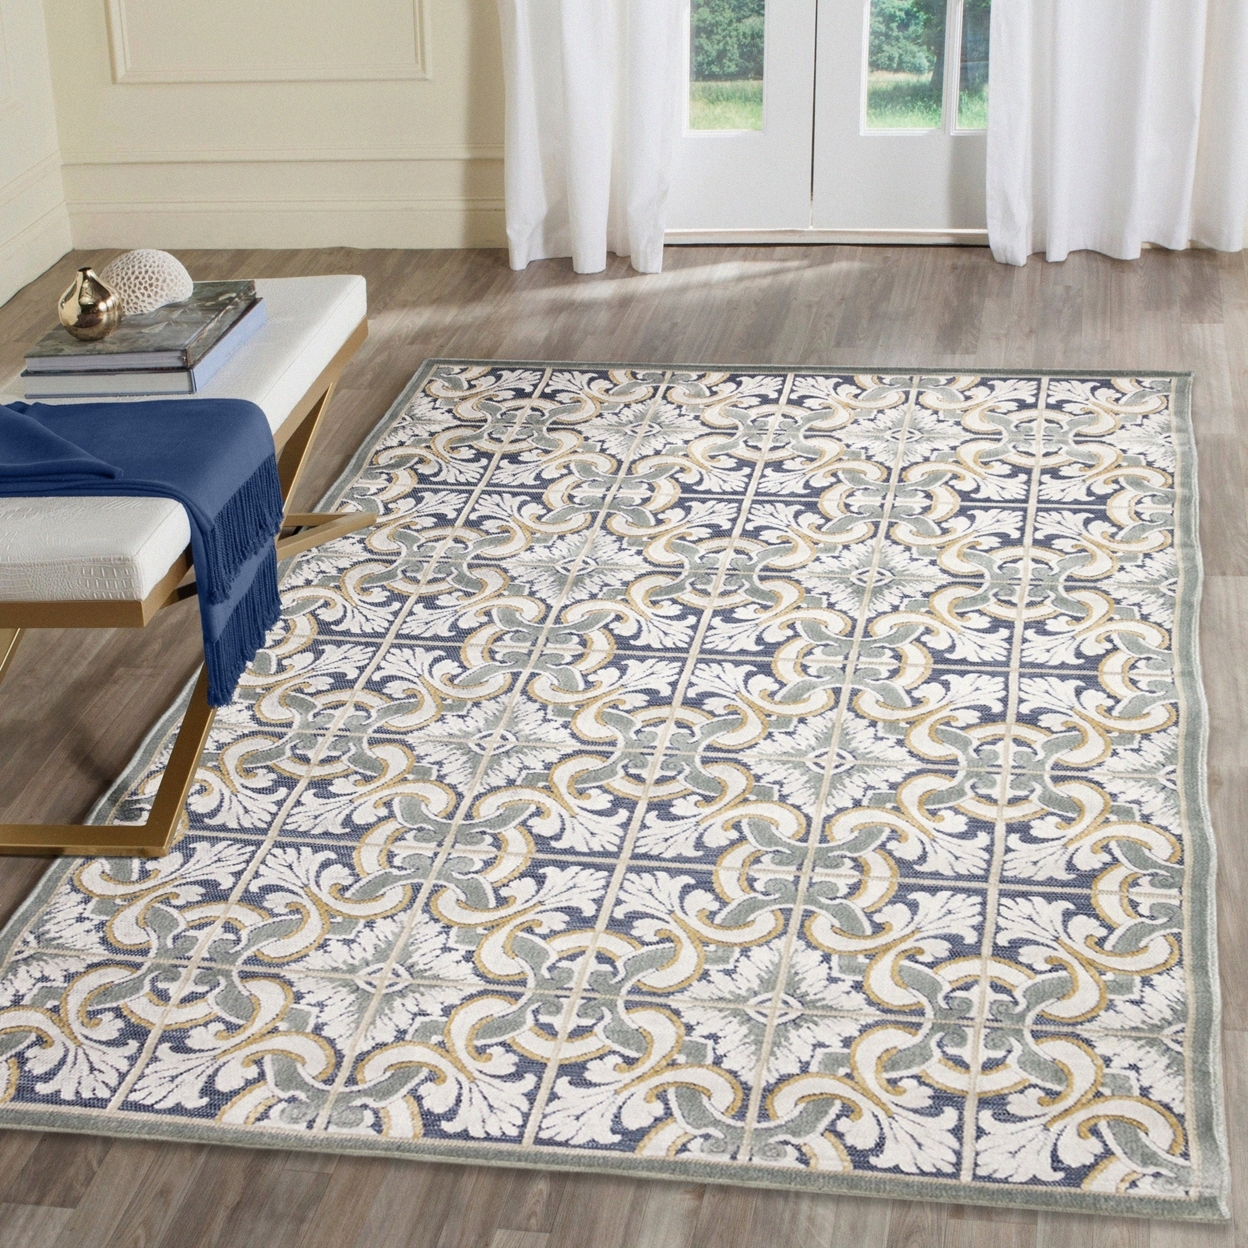 Liora Manne Canyon Floral Tile Indoor Outdoor Area Rug Navy - 7'8 X 9'10